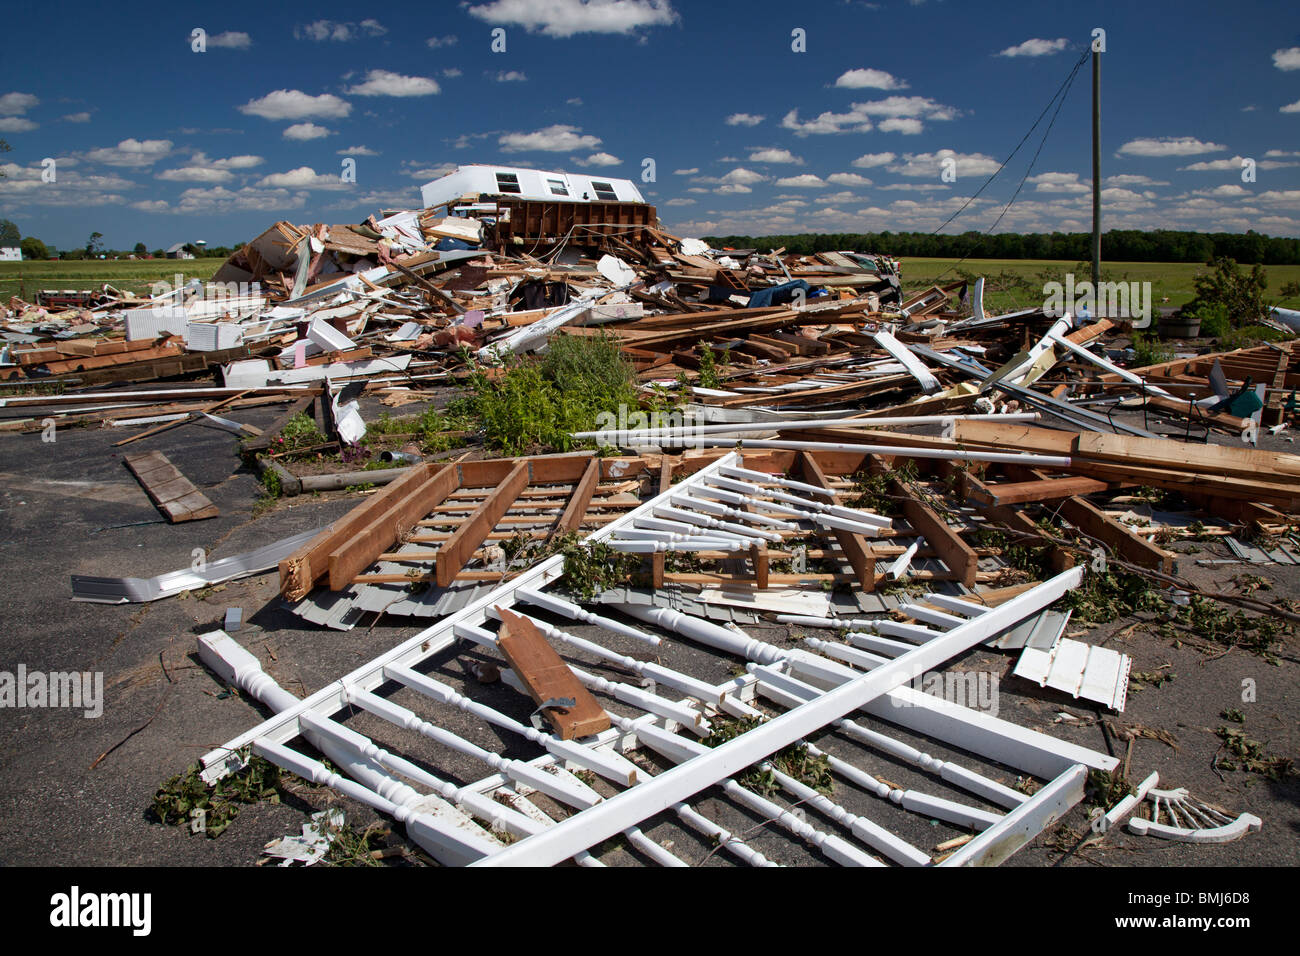 Dundee, Michigan - A house destroyed by a tornado. Stock Photo